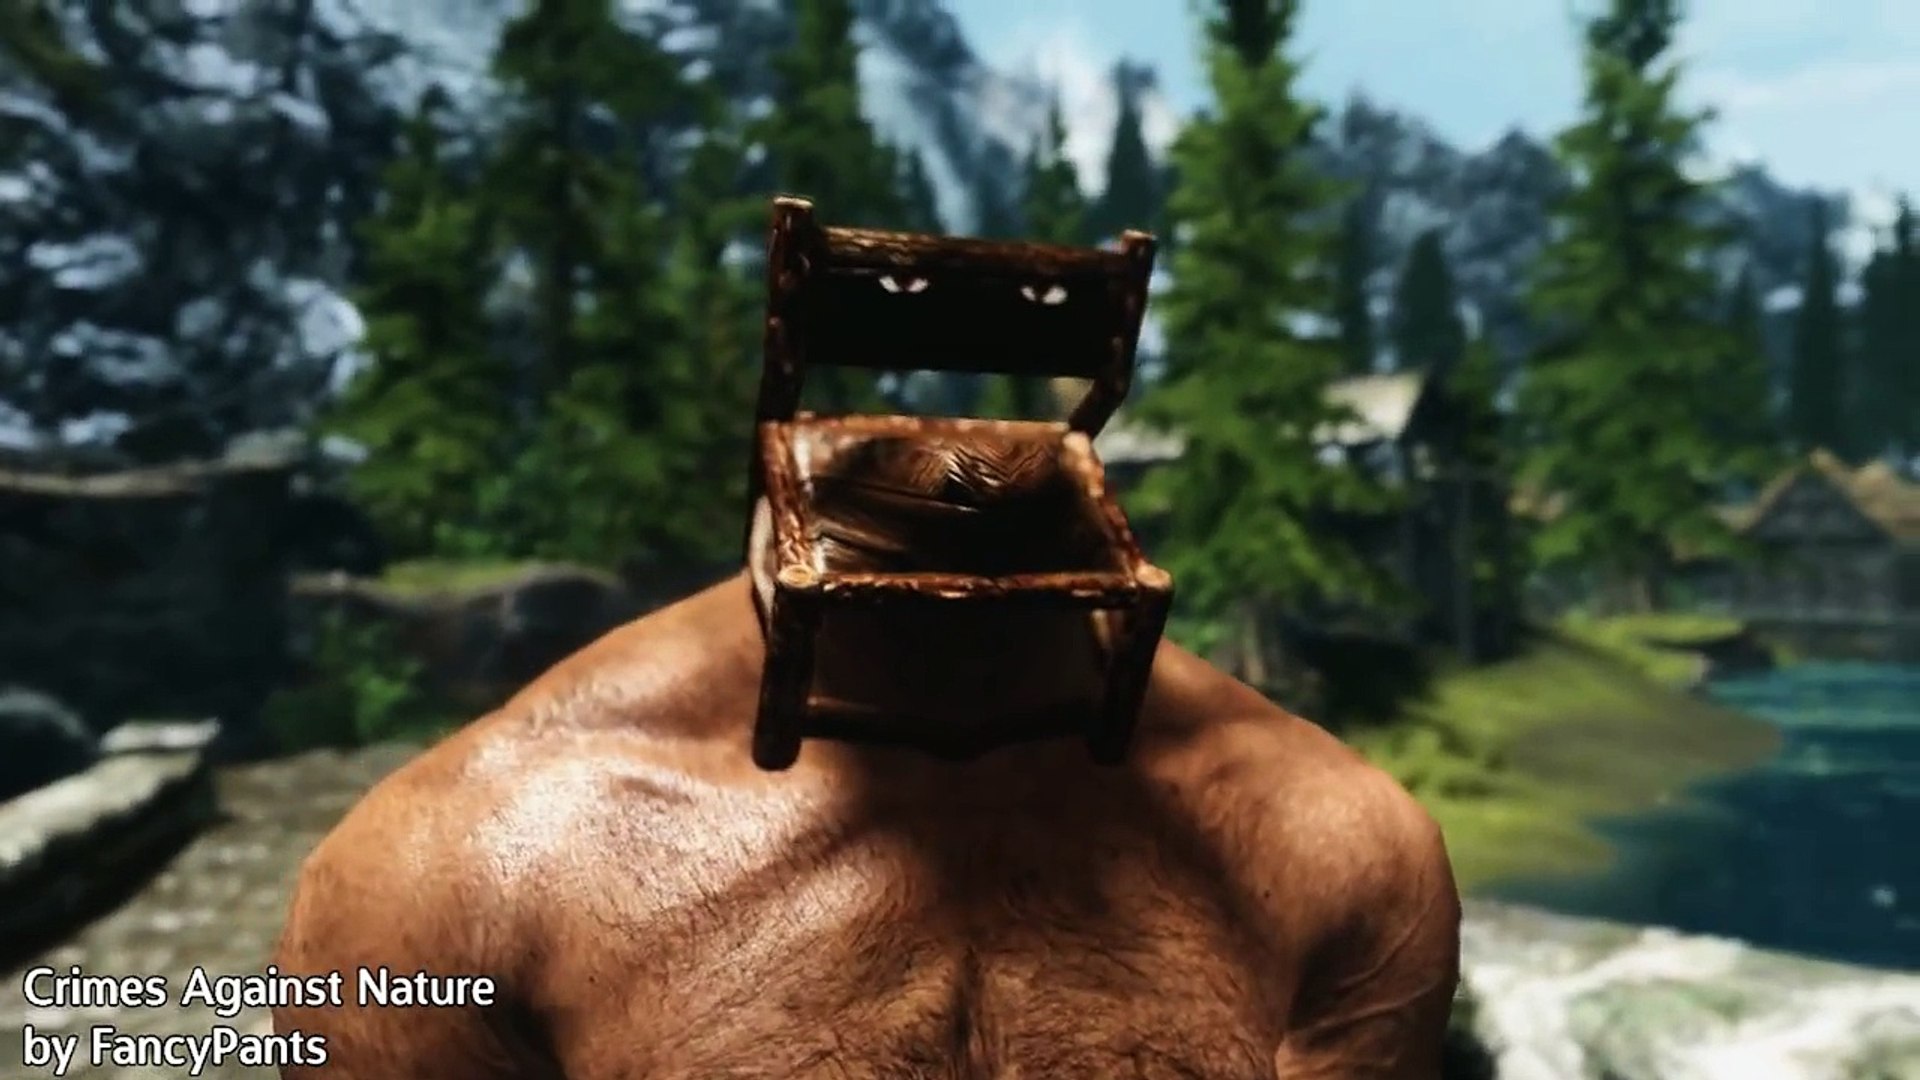 Skyrim Mods Crimes Against Nature - video dailymotion